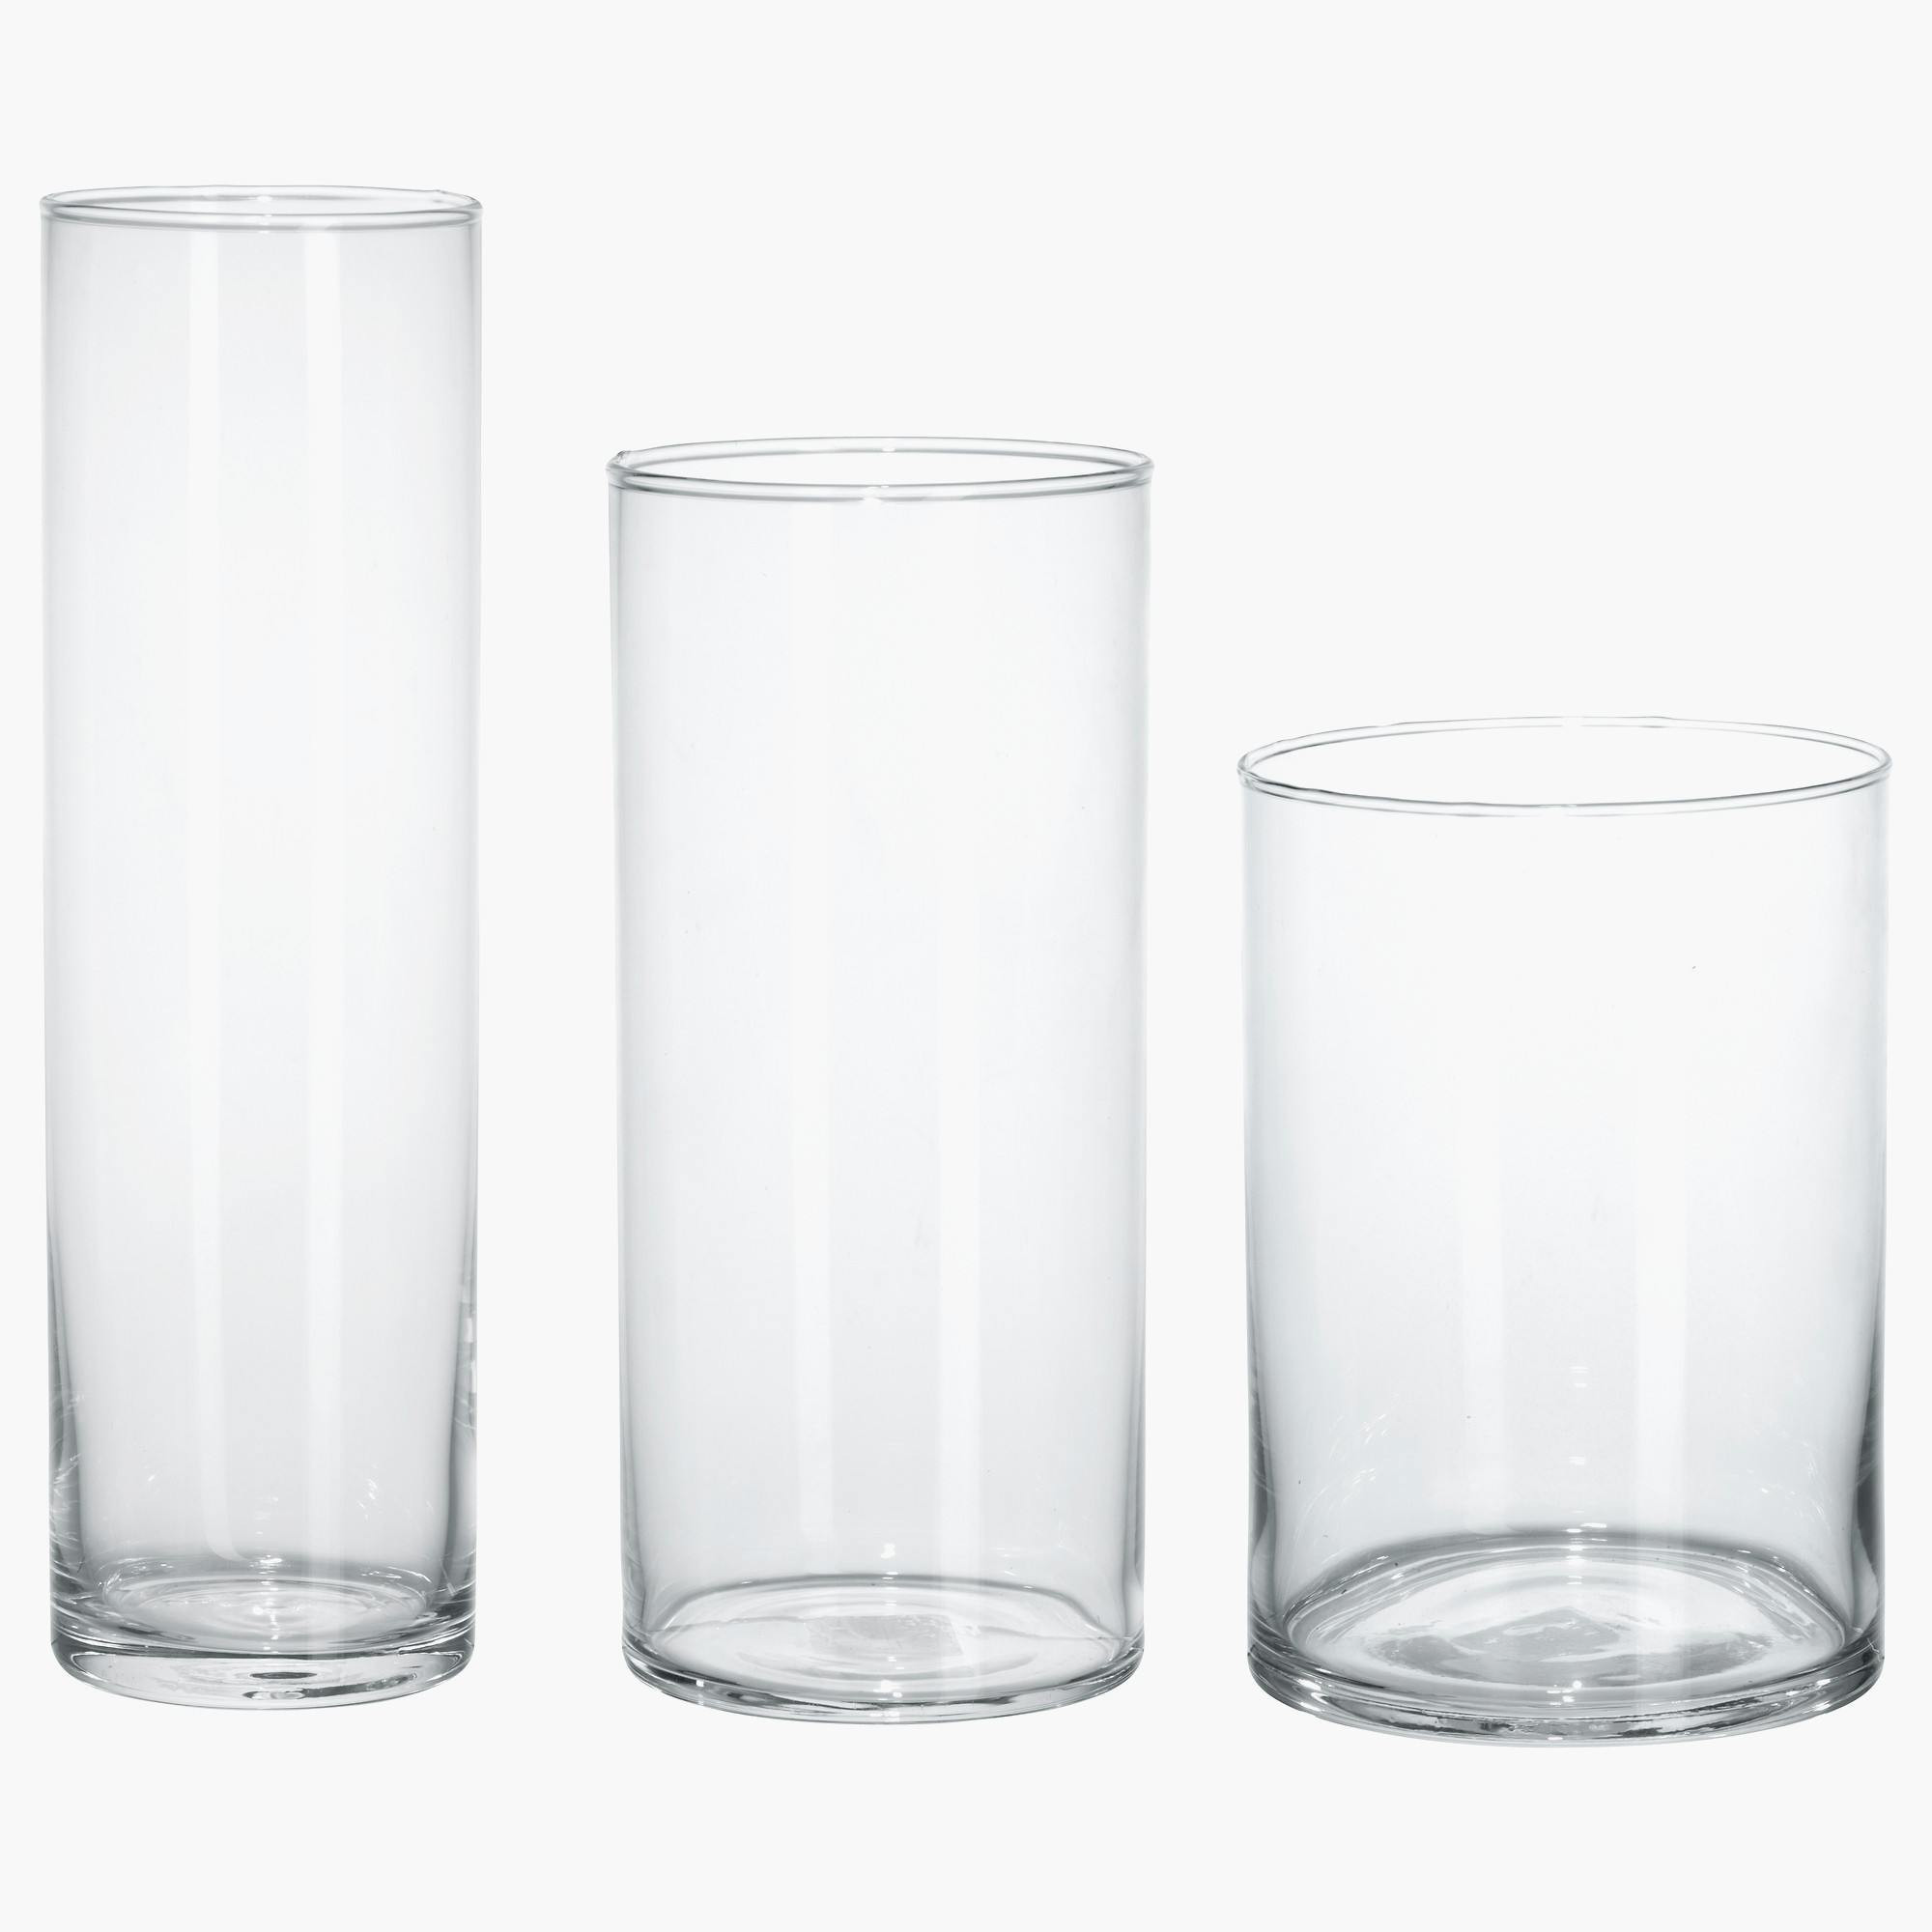 22 Unique Ikea Clear Glass Vases 2024 free download ikea clear glass vases of ikea flower vase pics 27 glass rack for bar quality new design ikea in ikea flower vase pics 27 glass rack for bar quality new design ikea glass display luxury